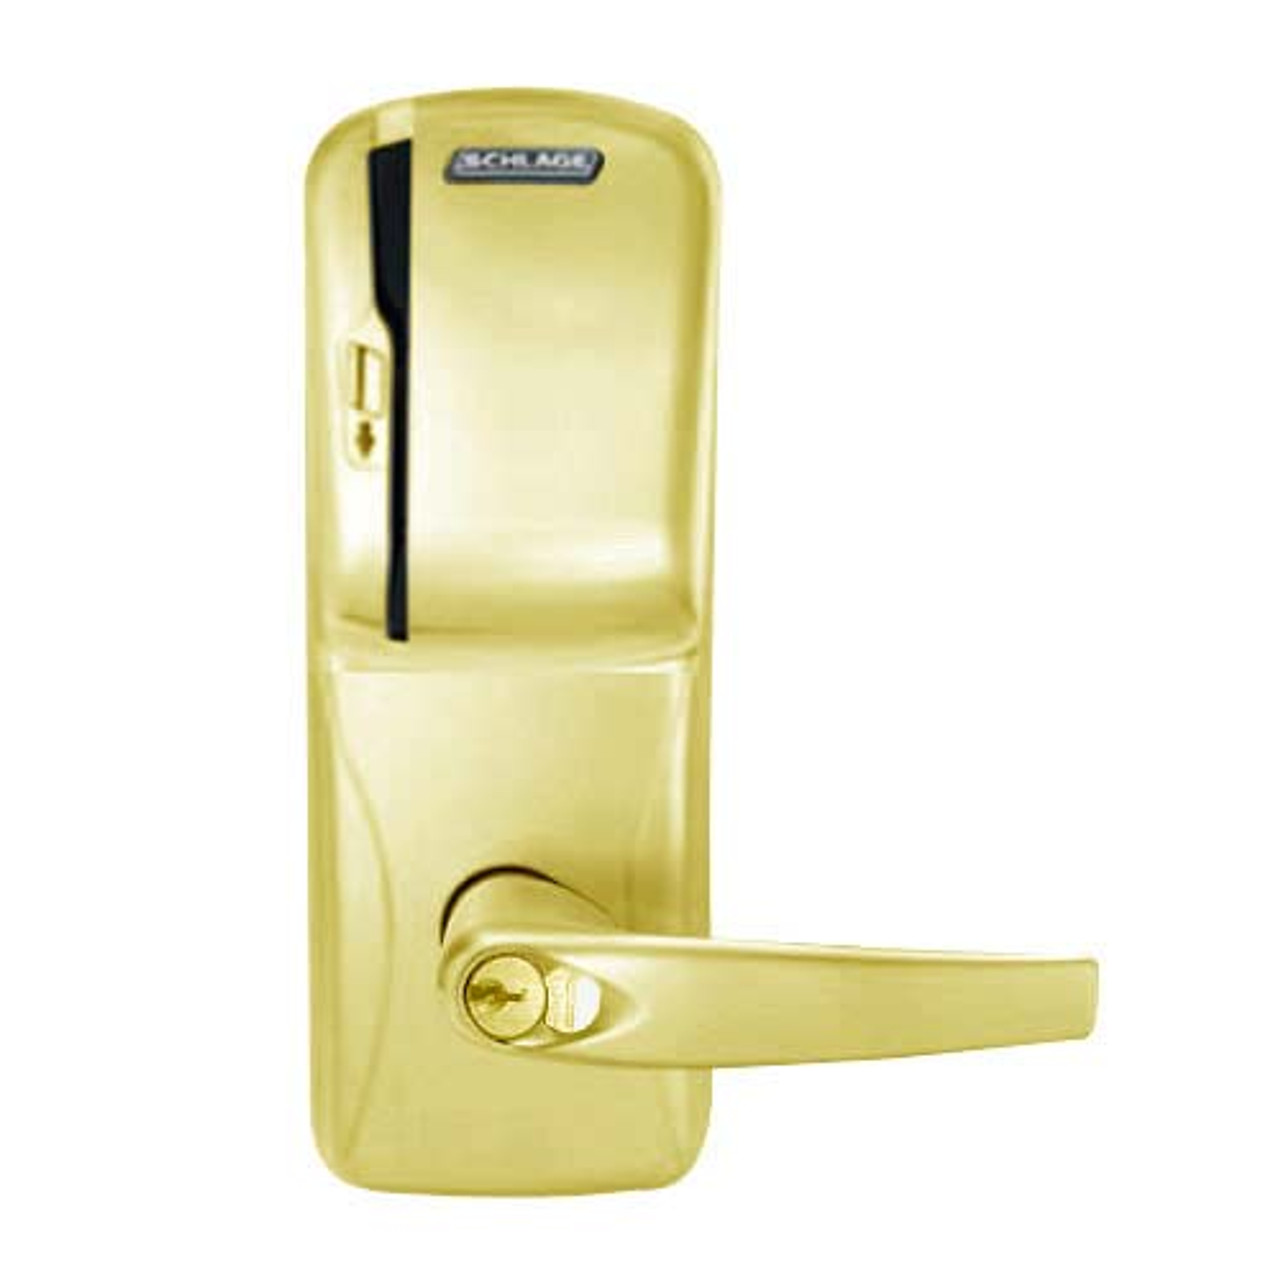 CO200-CY-70-MS-ATH-RD-605 Schlage Standalone Cylindrical Electronic Magnetic Stripe Reader Locks in Bright Brass